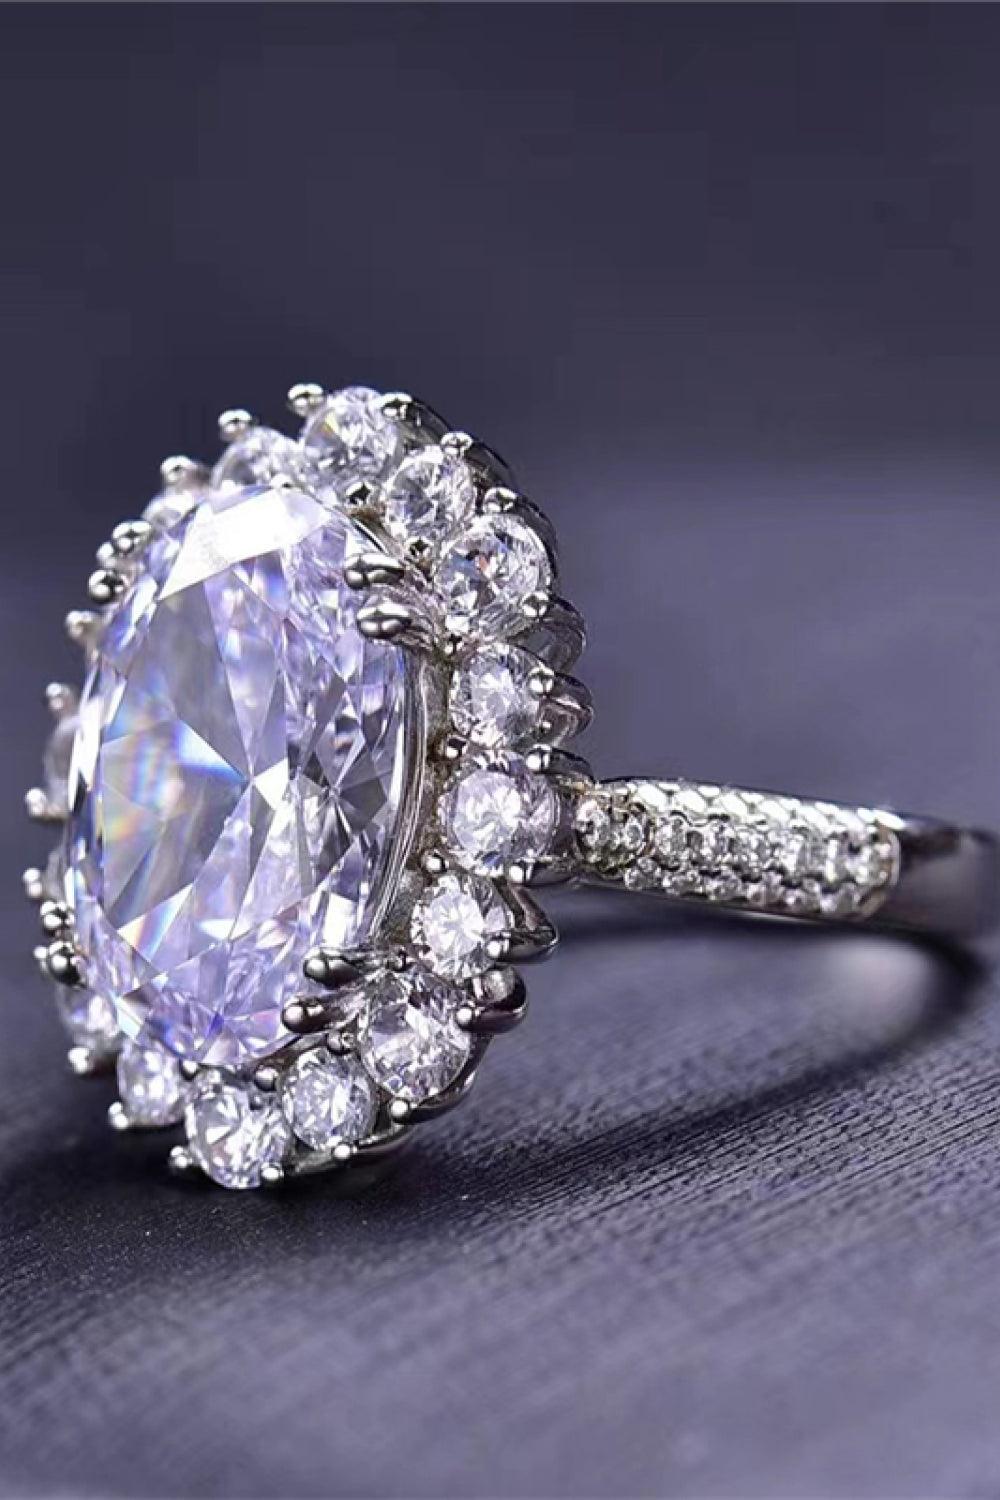 8 Carat Oval Moissanite Ring - CADEAUME